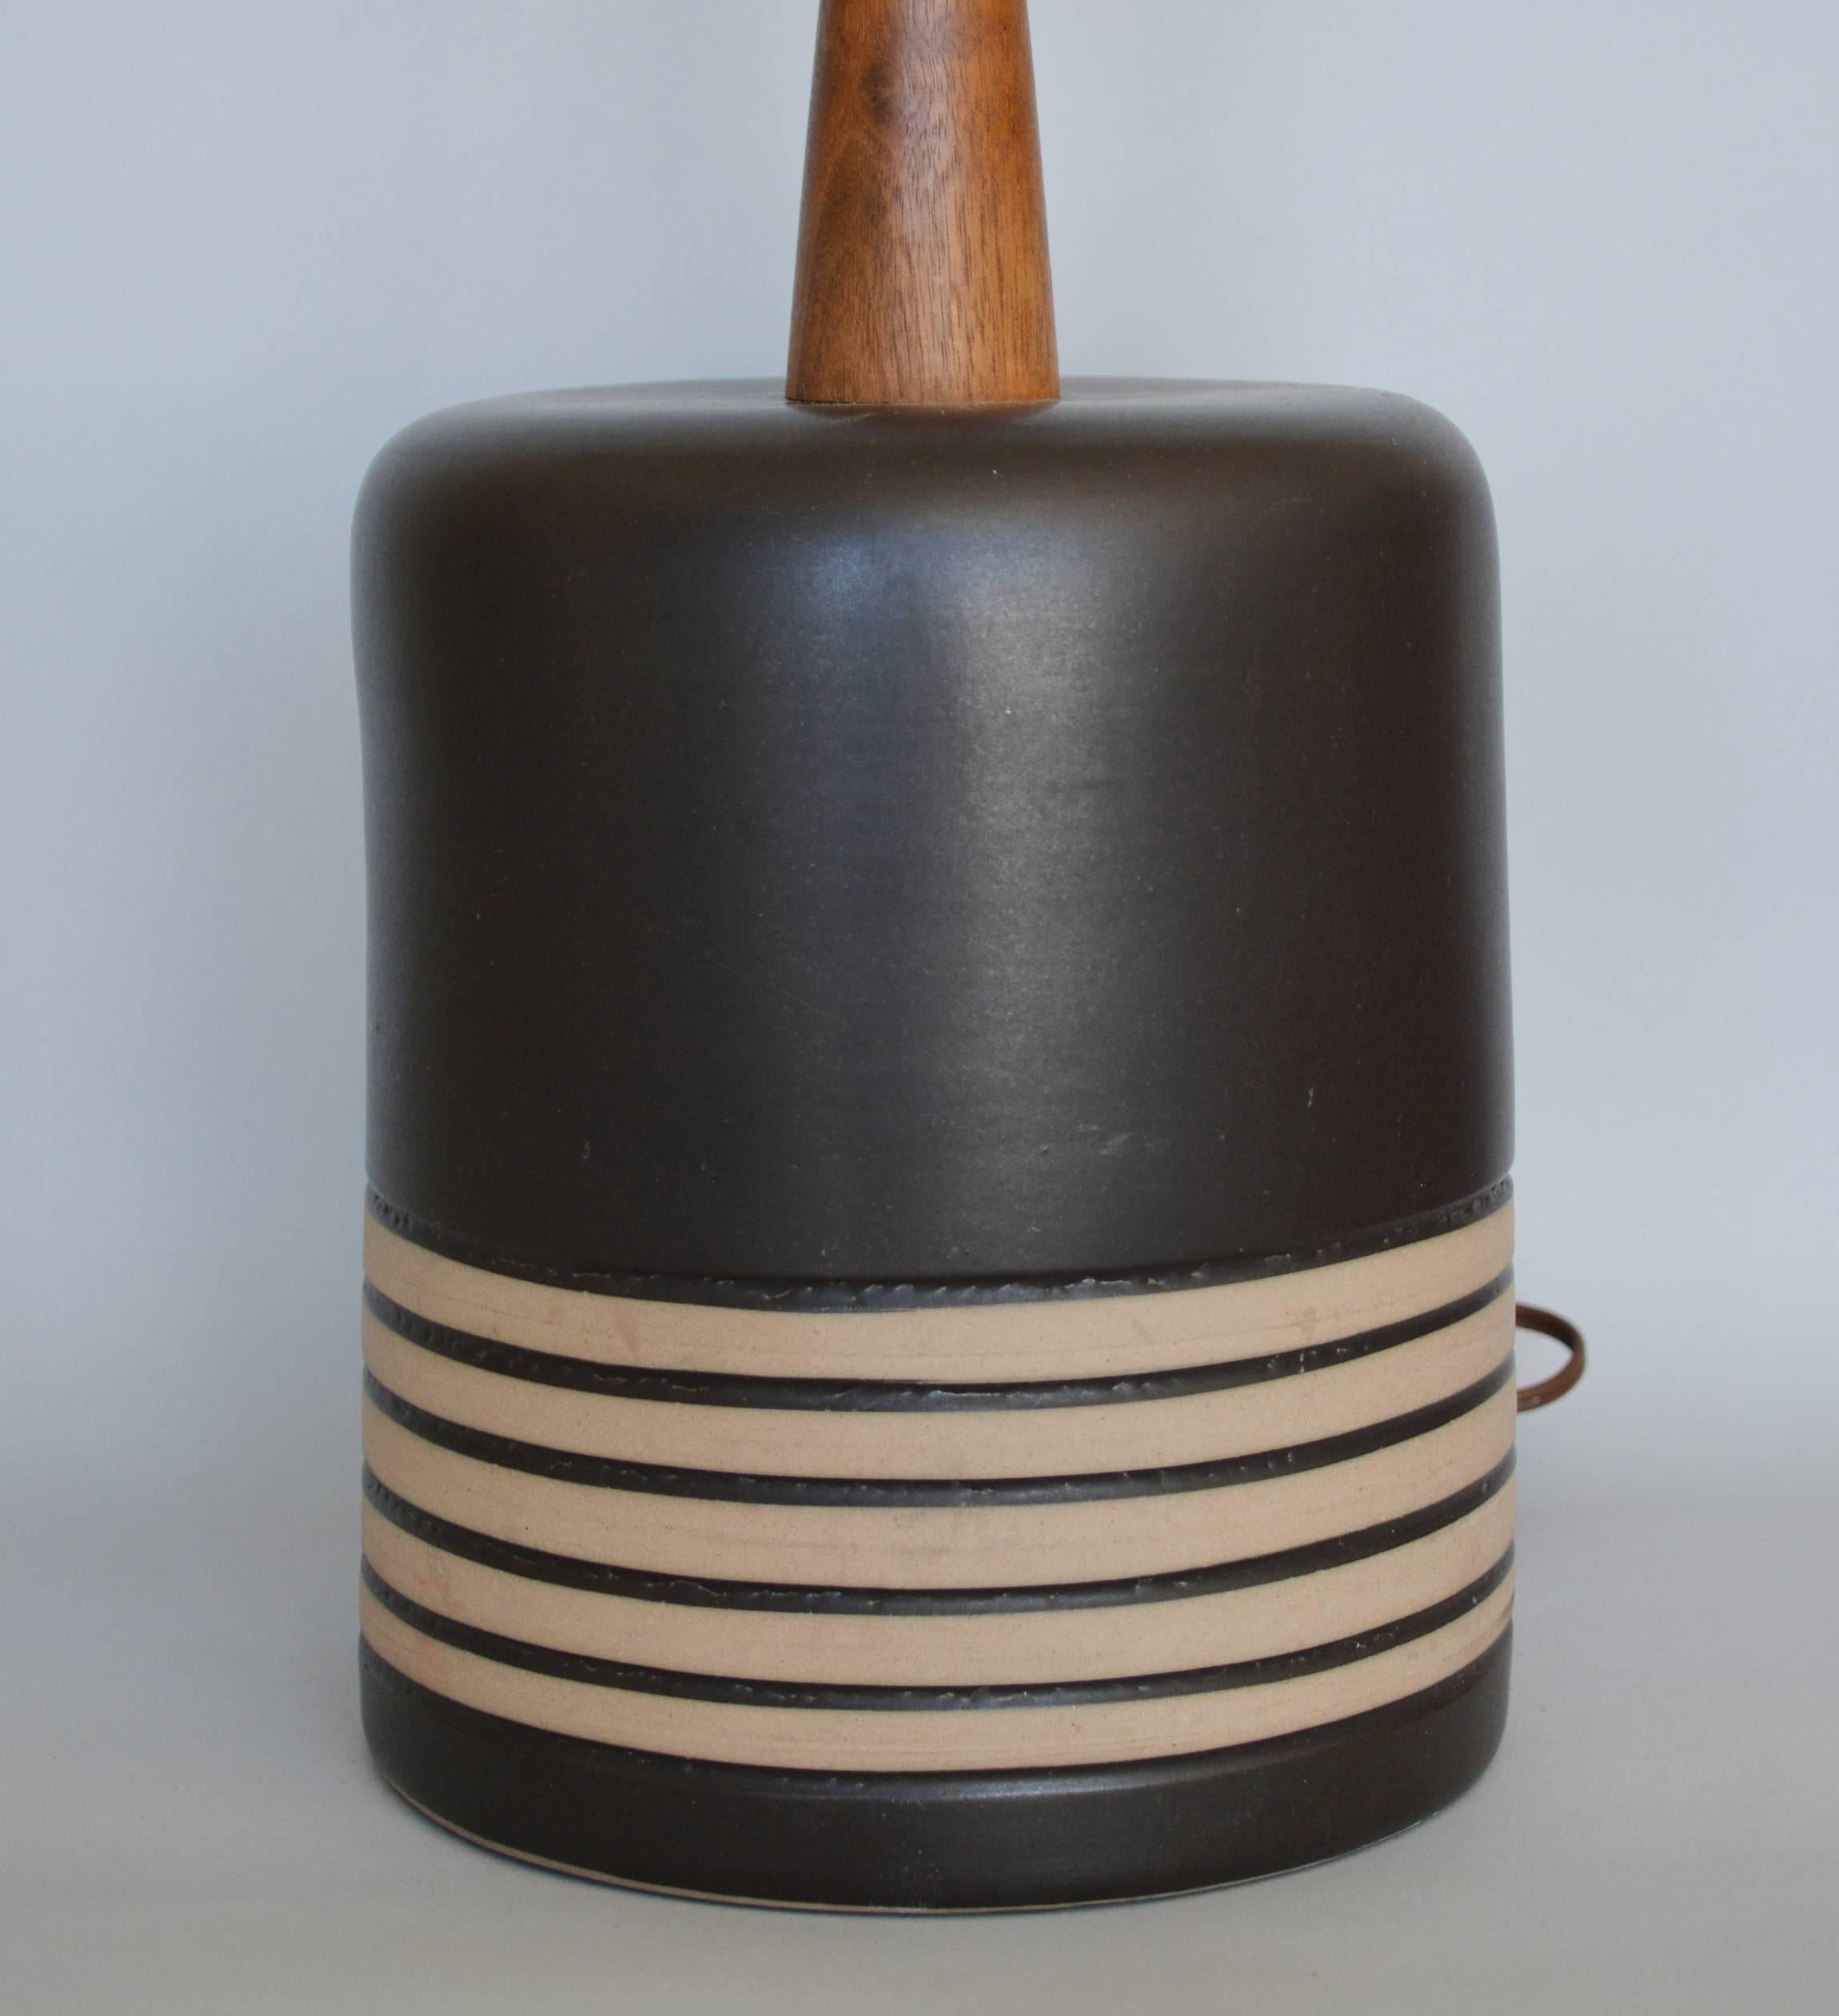 Martz table lamp with incised glazed rings separating unglazed bands. This retains the original walnut finial.